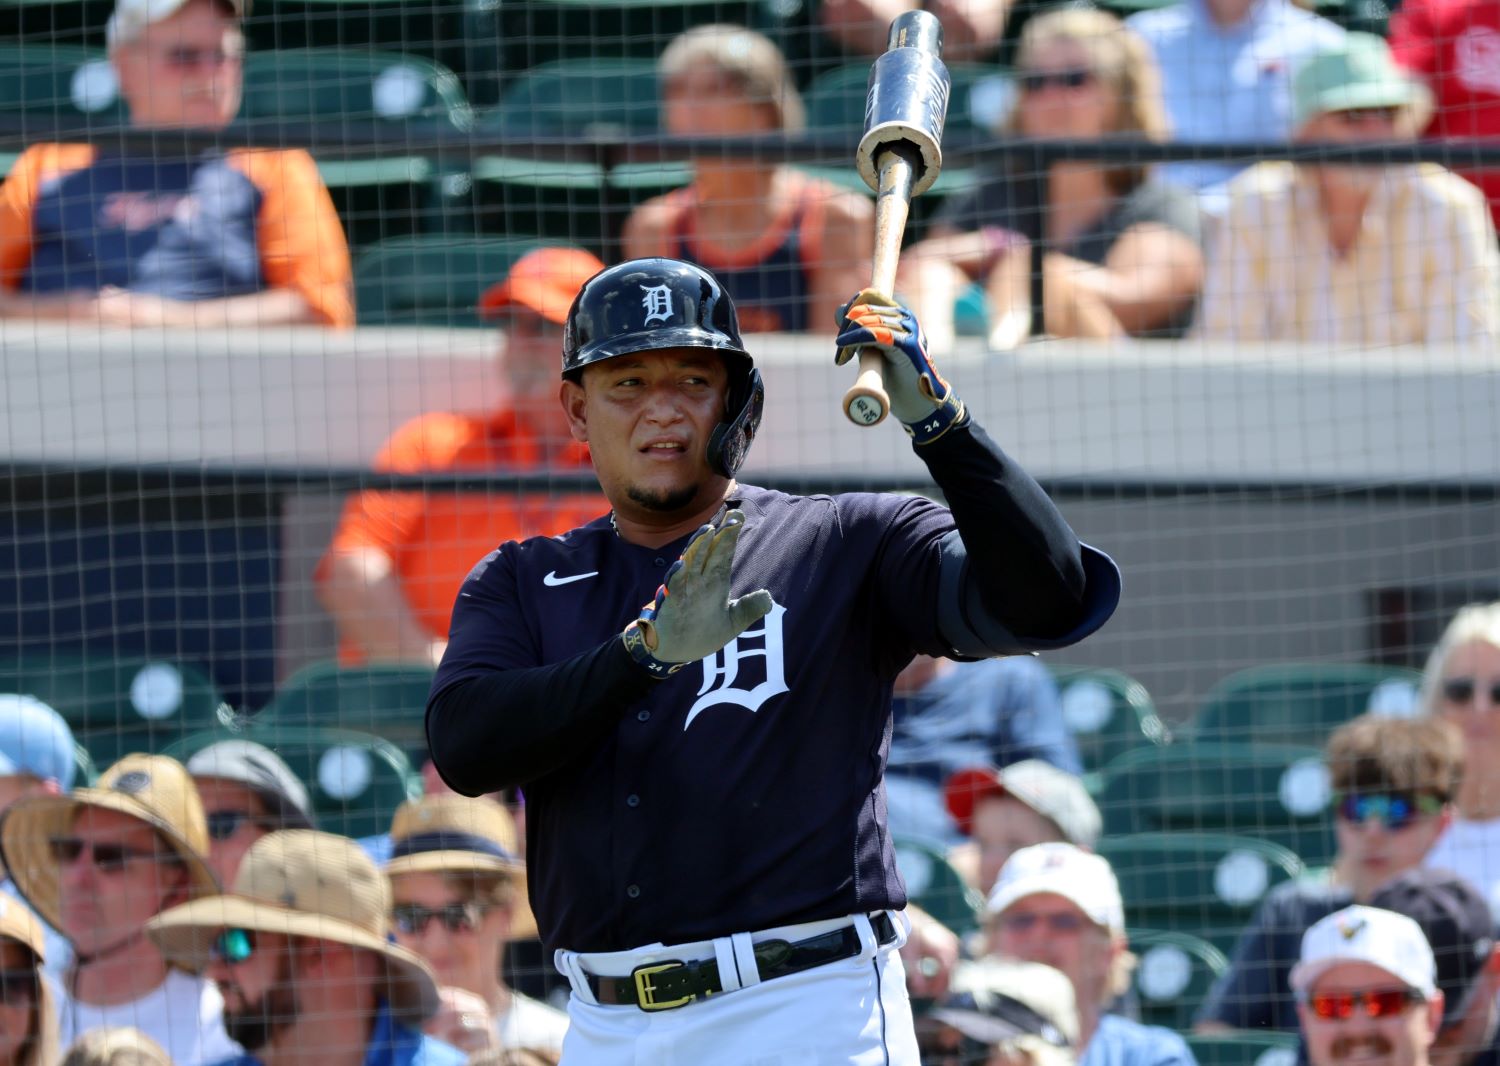 Detroit Tigers prospect Wilmer Flores 'improving' after injury